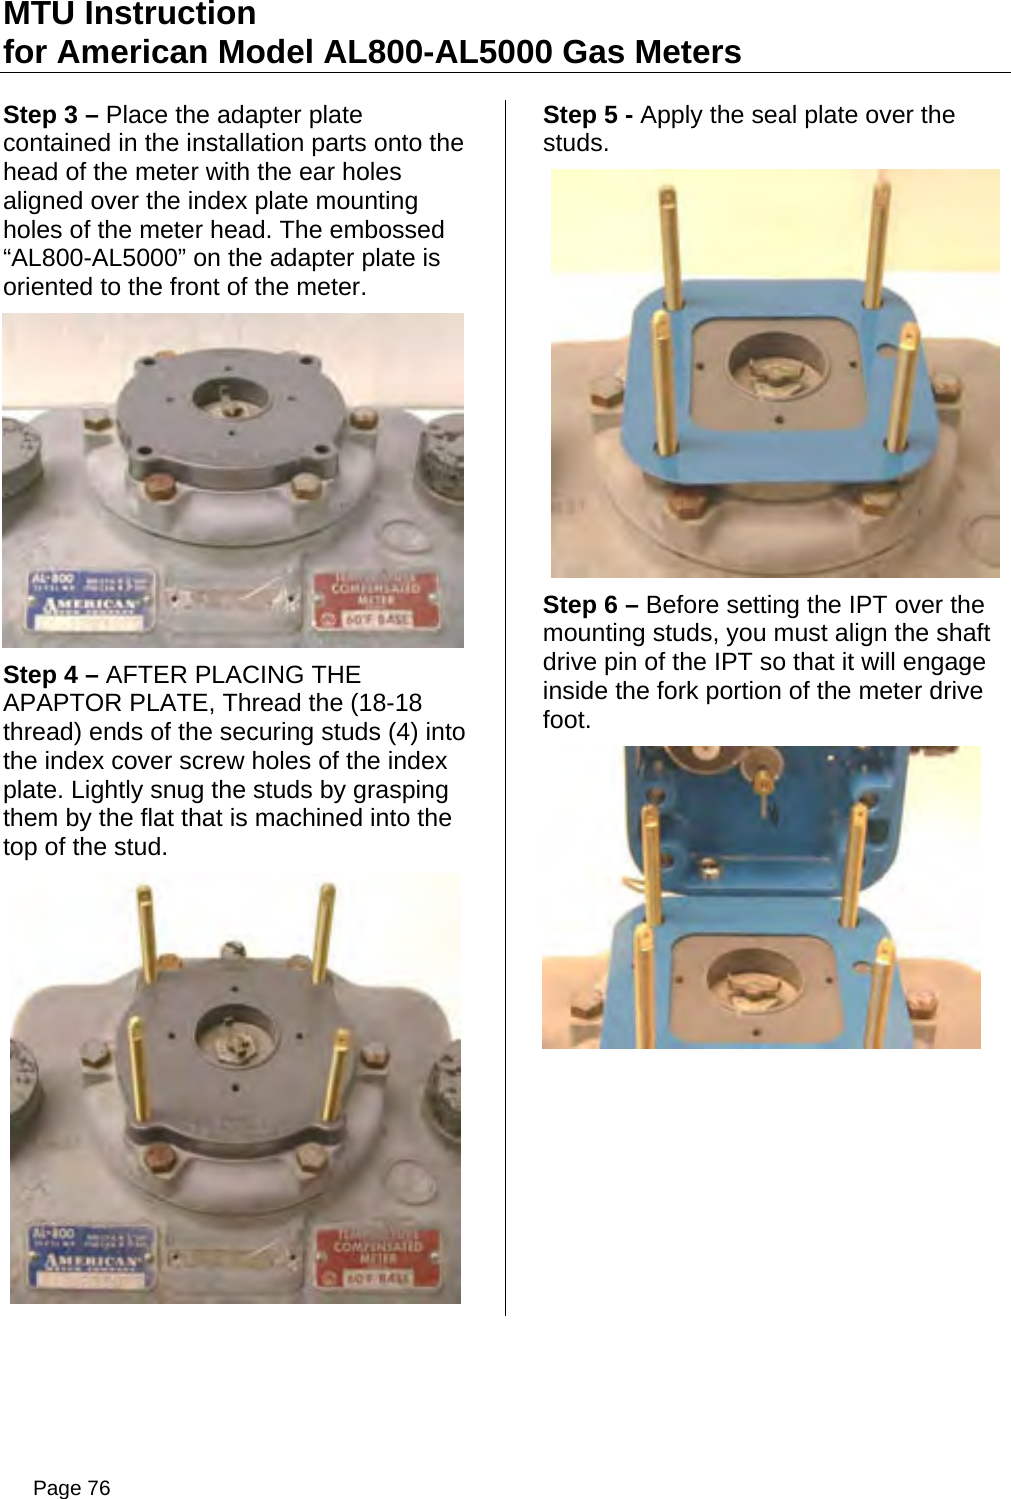 MTU Instruction for American Model AL800-AL5000 Gas Meters Step 3 – Place the adapter plate contained in the installation parts onto the head of the meter with the ear holes aligned over the index plate mounting holes of the meter head. The embossed “AL800-AL5000” on the adapter plate is oriented to the front of the meter.  Step 4 – AFTER PLACING THE APAPTOR PLATE, Thread the (18-18 thread) ends of the securing studs (4) into the index cover screw holes of the index plate. Lightly snug the studs by grasping them by the flat that is machined into the top of the stud.  Step 5 - Apply the seal plate over the studs.  Step 6 – Before setting the IPT over the mounting studs, you must align the shaft drive pin of the IPT so that it will engage inside the fork portion of the meter drive foot.  Page 76